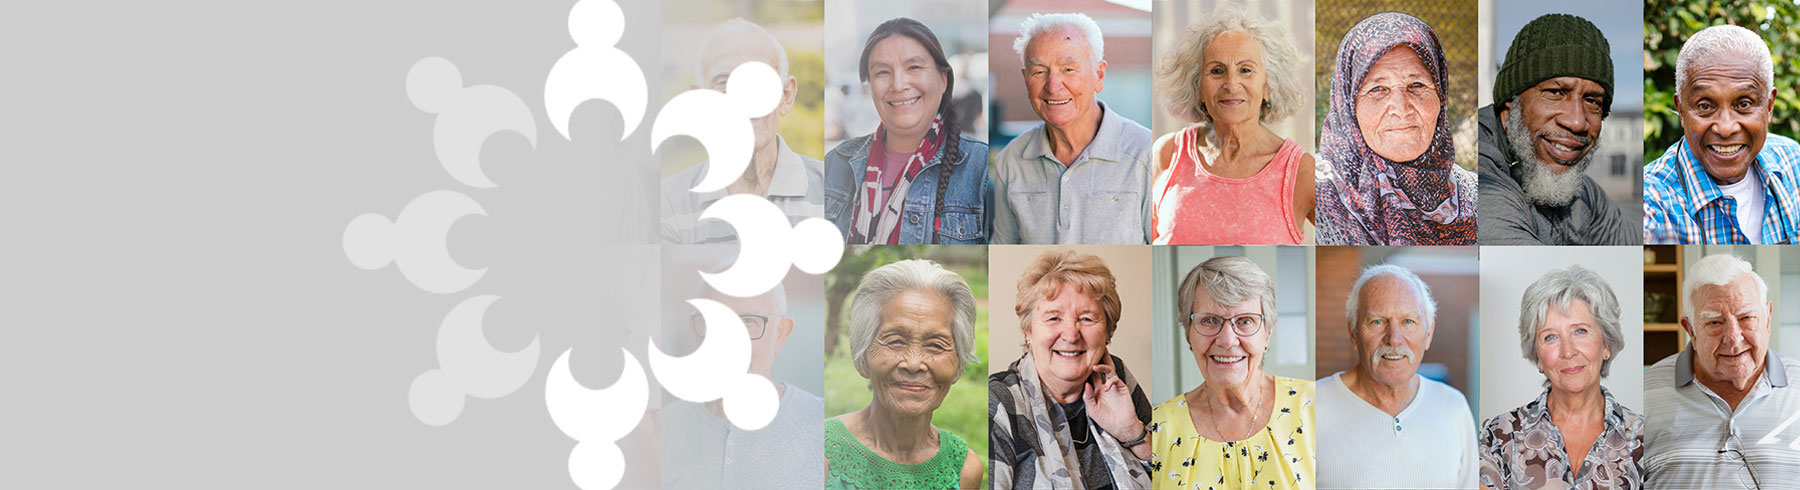 A collage of images of multicultural older adults smiling